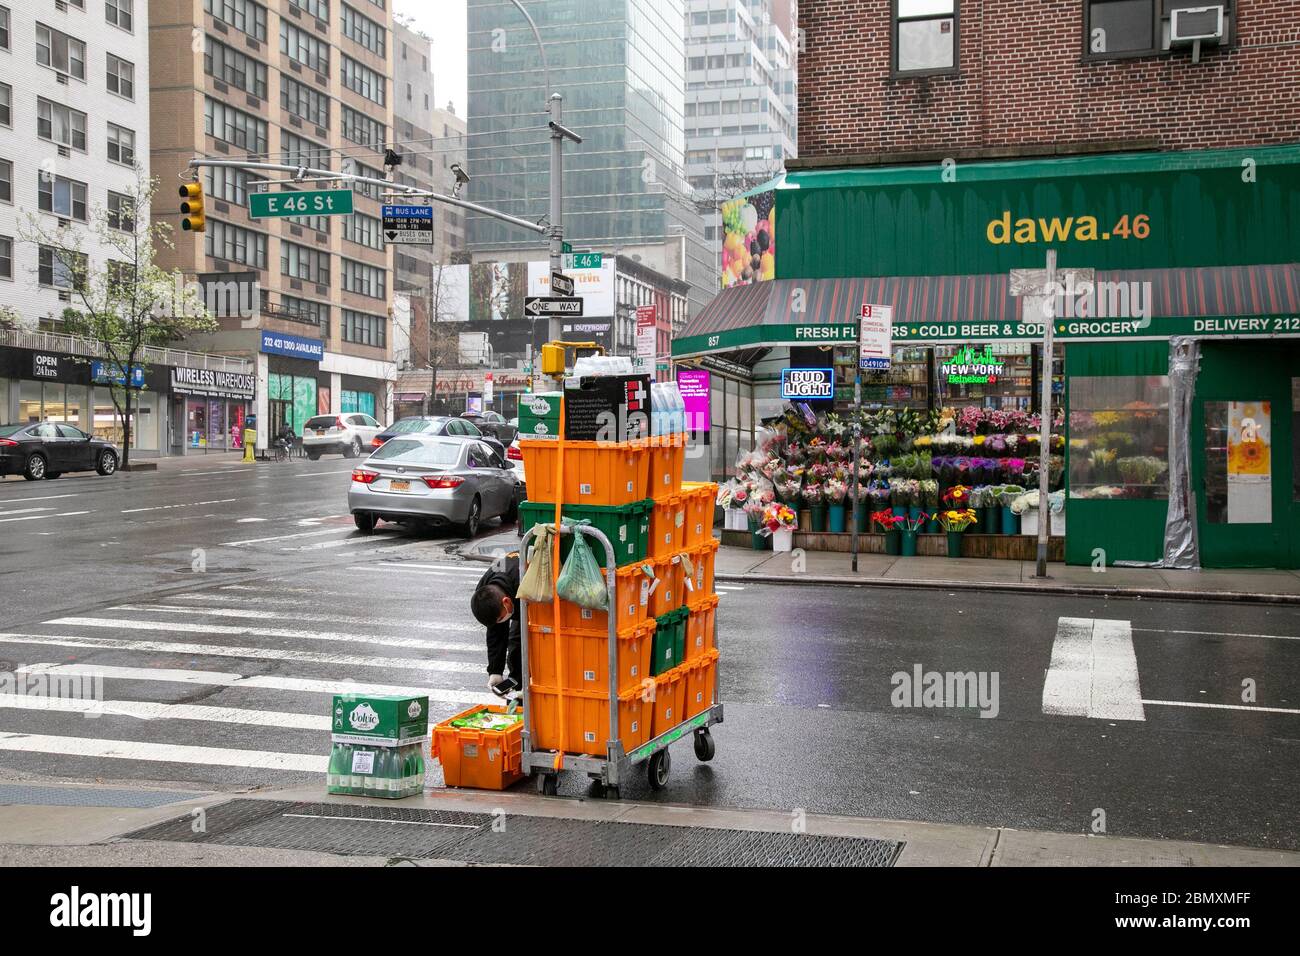 Delivery worker checking container contents on a rainy day in New York City. Stock Photo